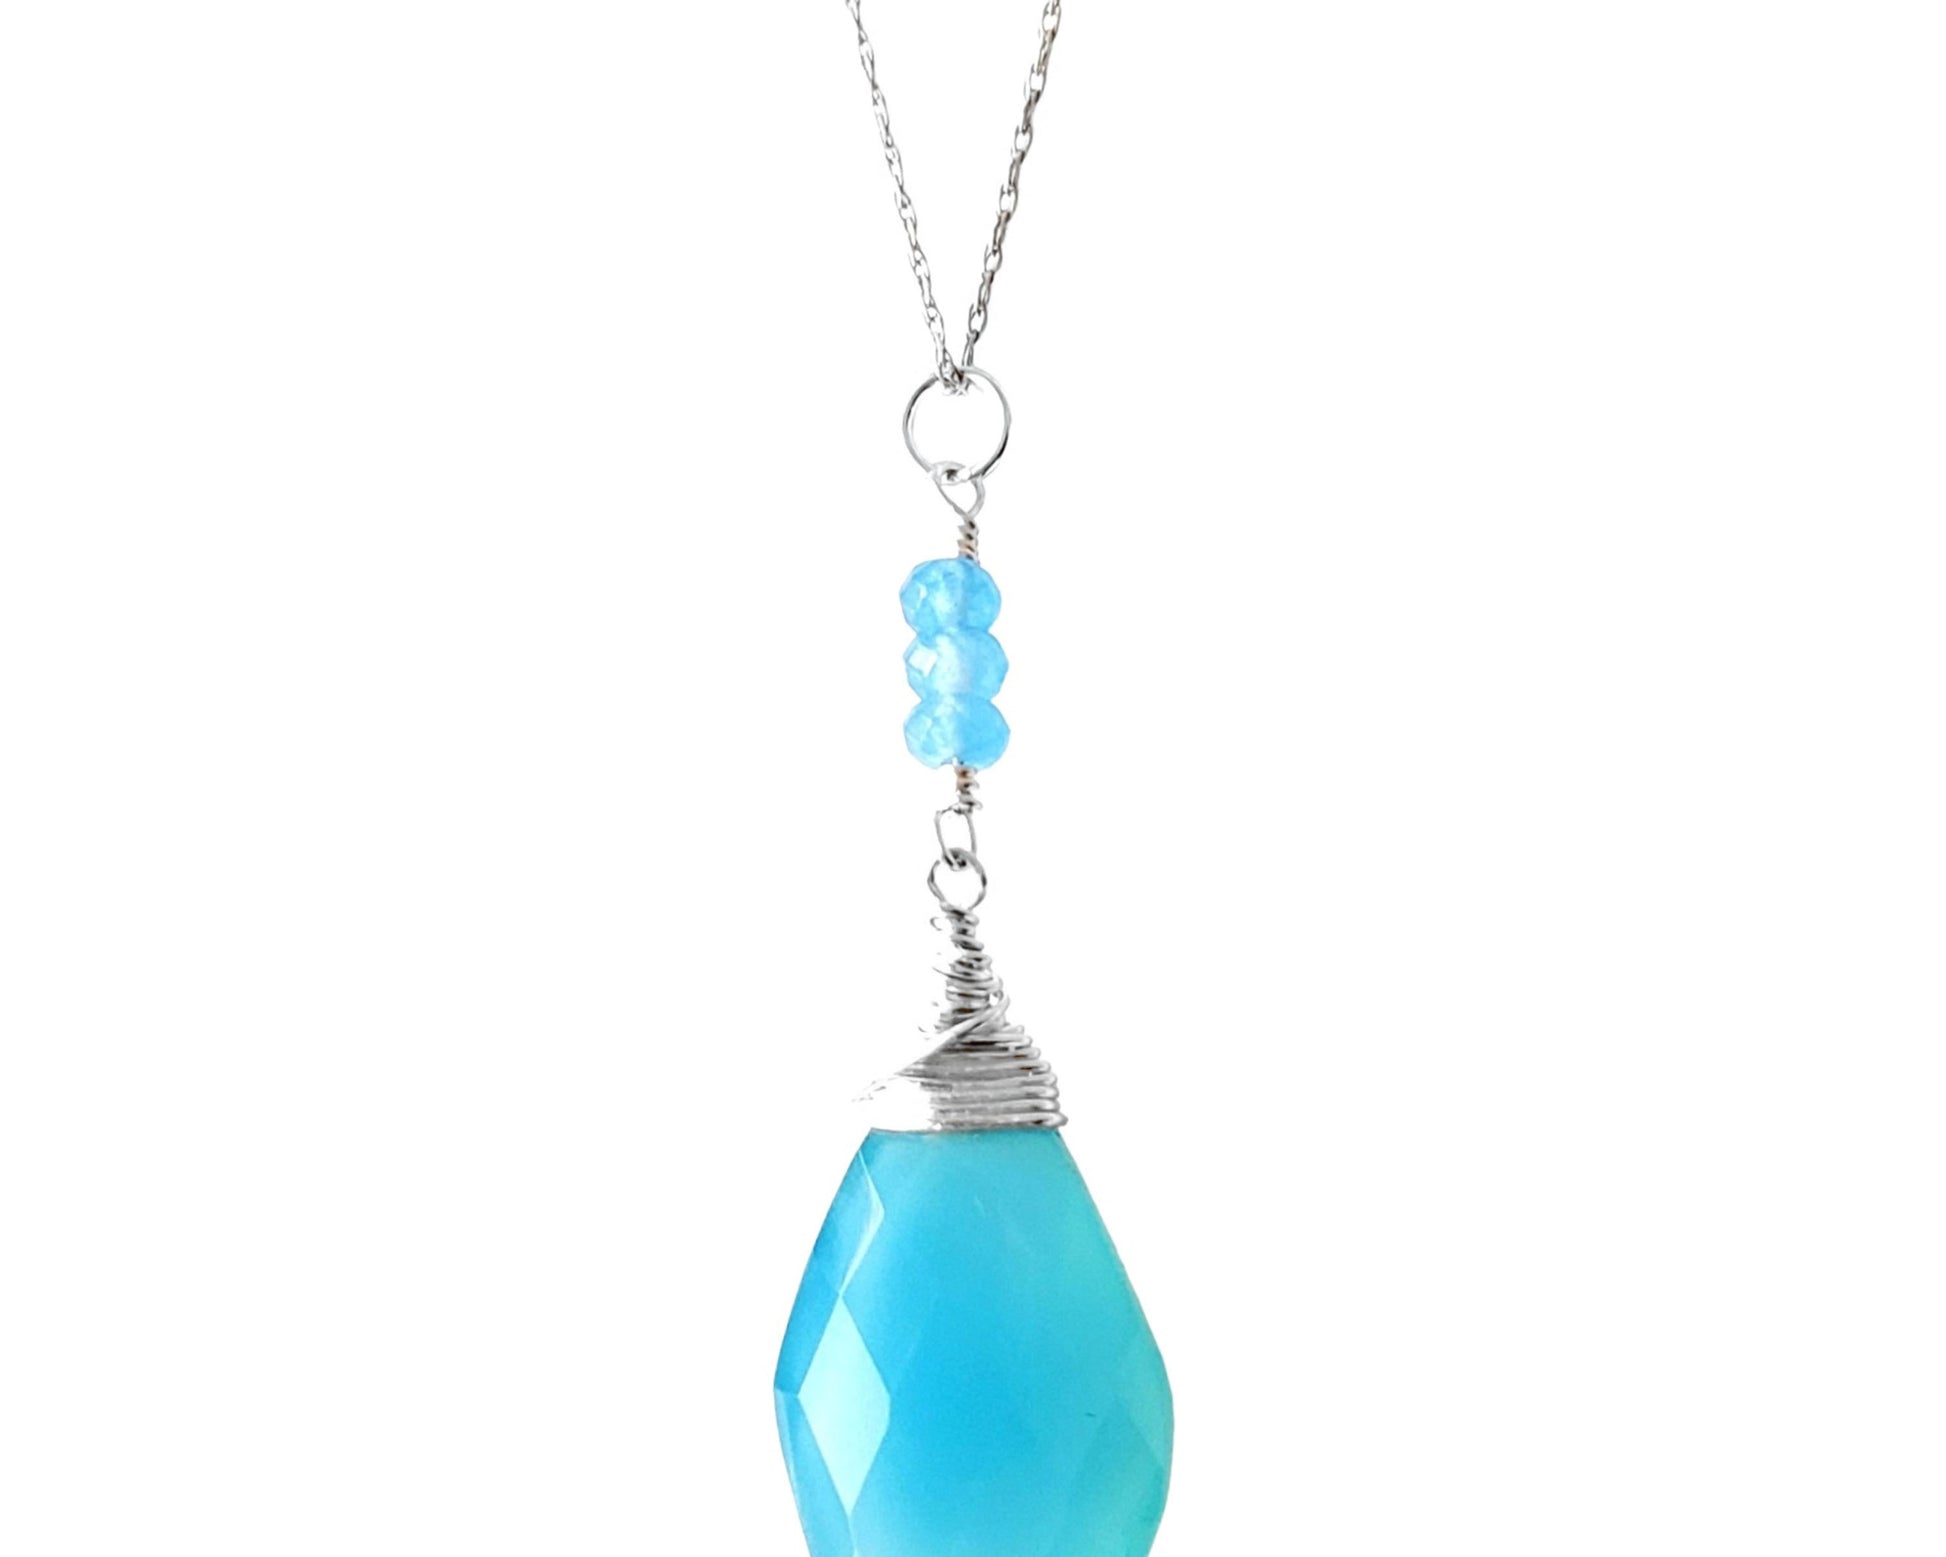 Art Deco Inspired Blue Chalcedony Jade Pendant made with Sterling Silver,  large blue Chalcedony stone decoratively wire wrapped to small blue Jade stones, dangle on a fine chain. 